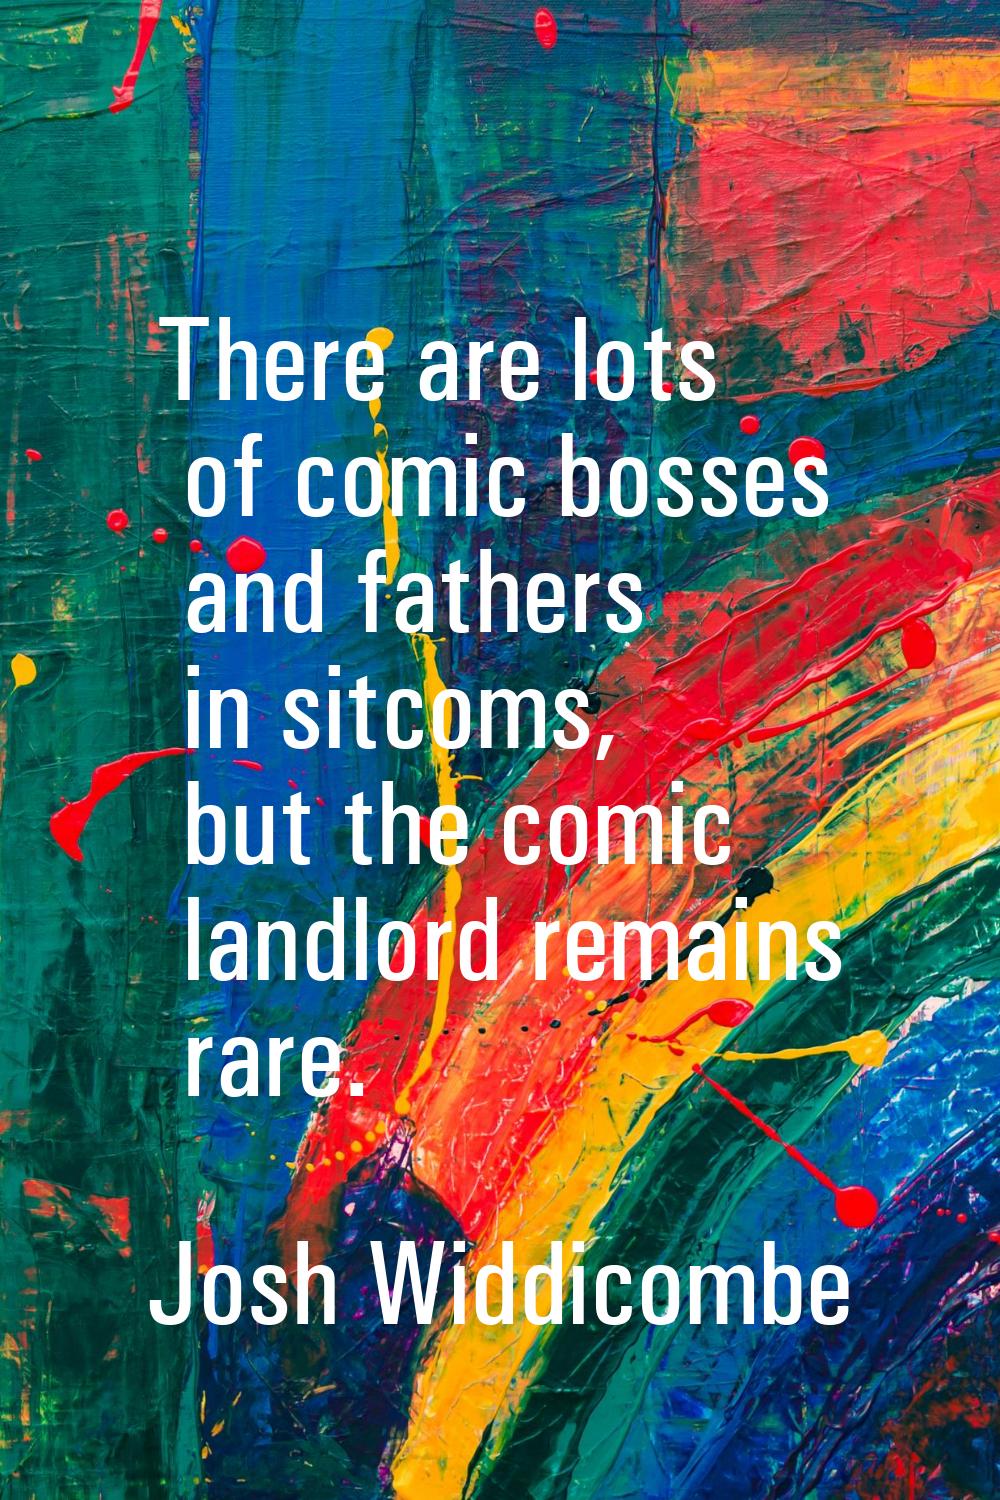 There are lots of comic bosses and fathers in sitcoms, but the comic landlord remains rare.